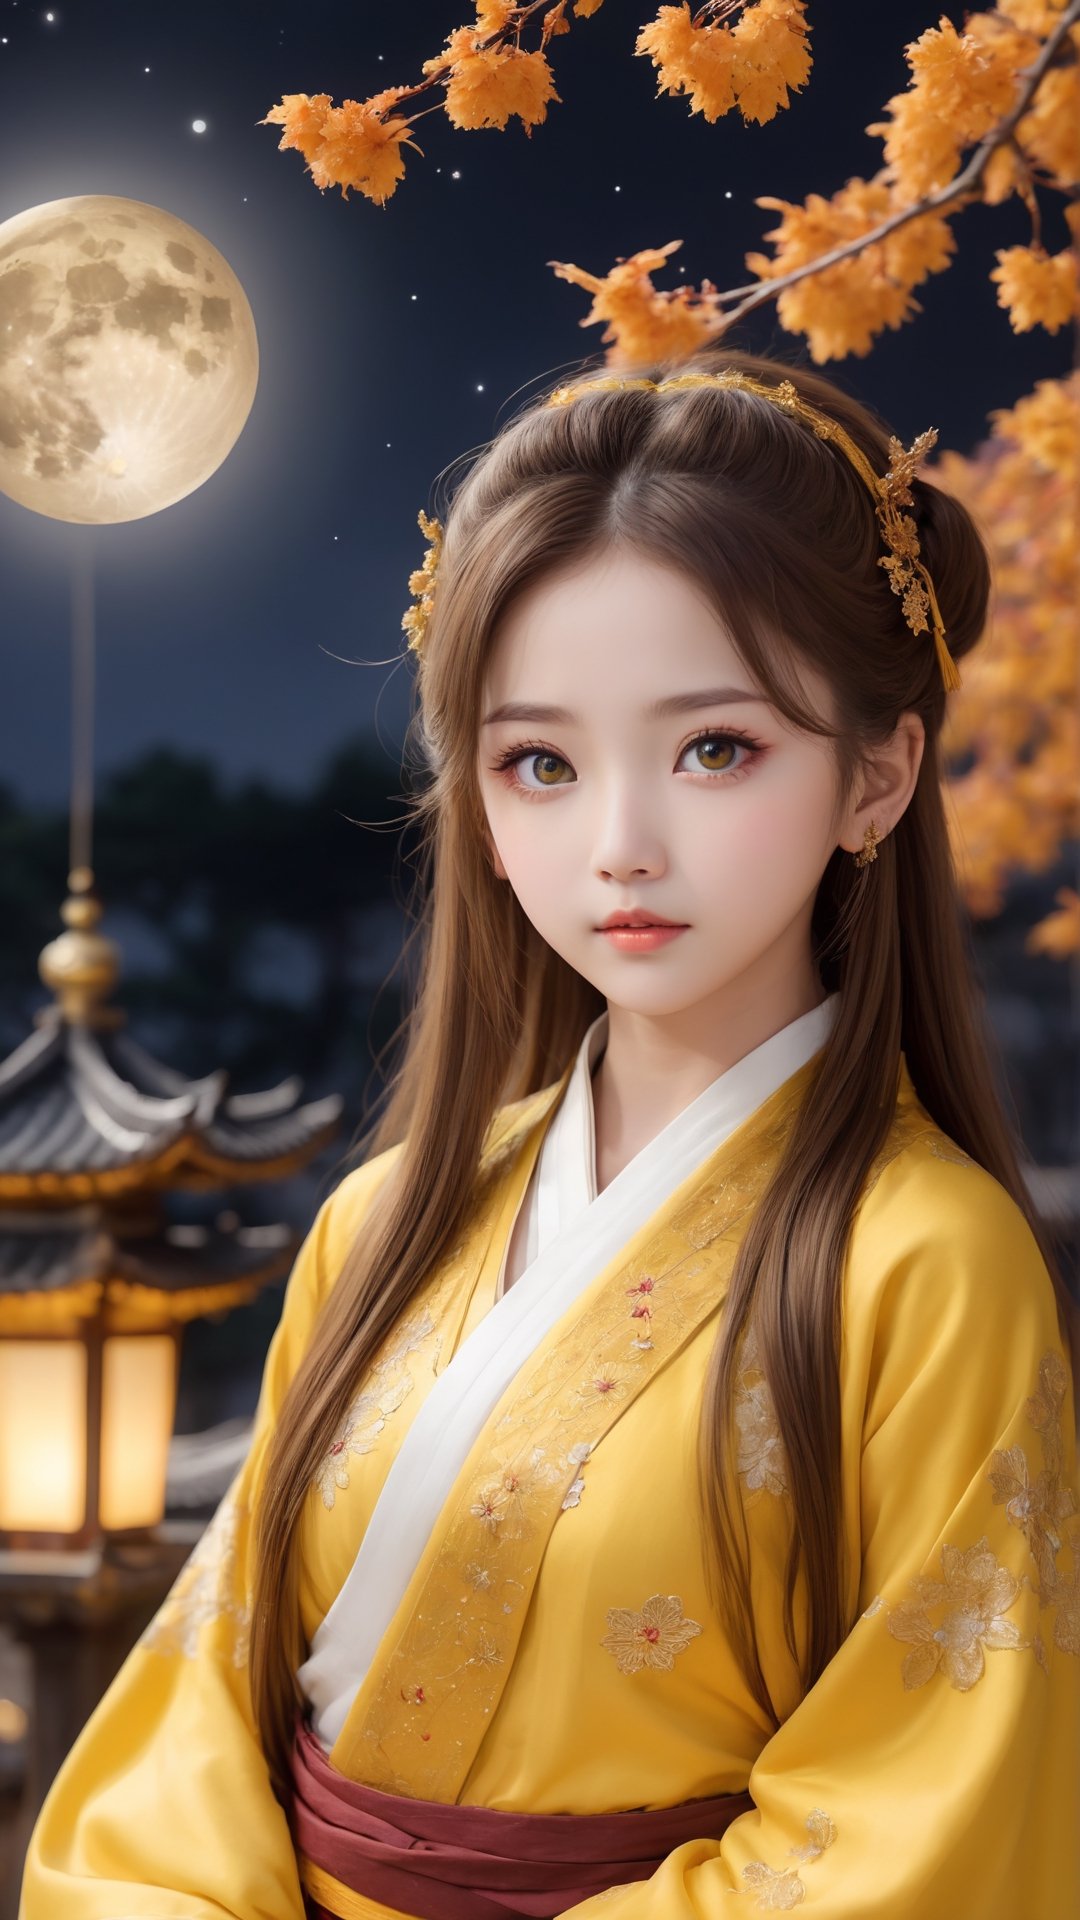 best quality, masterpiece, ultra detailed, 3dmm, ink sketch, color ink, ink rendering, 
1girl, beautiful detailed eyes, (alternate hairstyle), ultra detailed hair, graceful, (charming), (delicate), pretty, cute, joy, young girl, professional clothing, vivid, cover, Autumn style, realistic high quality portrait photography, full body, Moon night, maple,A cute and beautiful six-year-old girl, wearing a beautiful yellow Hanfu, lying on the roof of the palace, looking at the moon in the sky, her eyes are big, charming and beautiful, flowers blooming fantastic amazing tale and lamps lighting bokeh as background.
character in the center of the frame, fantasy, looking at viewer, 